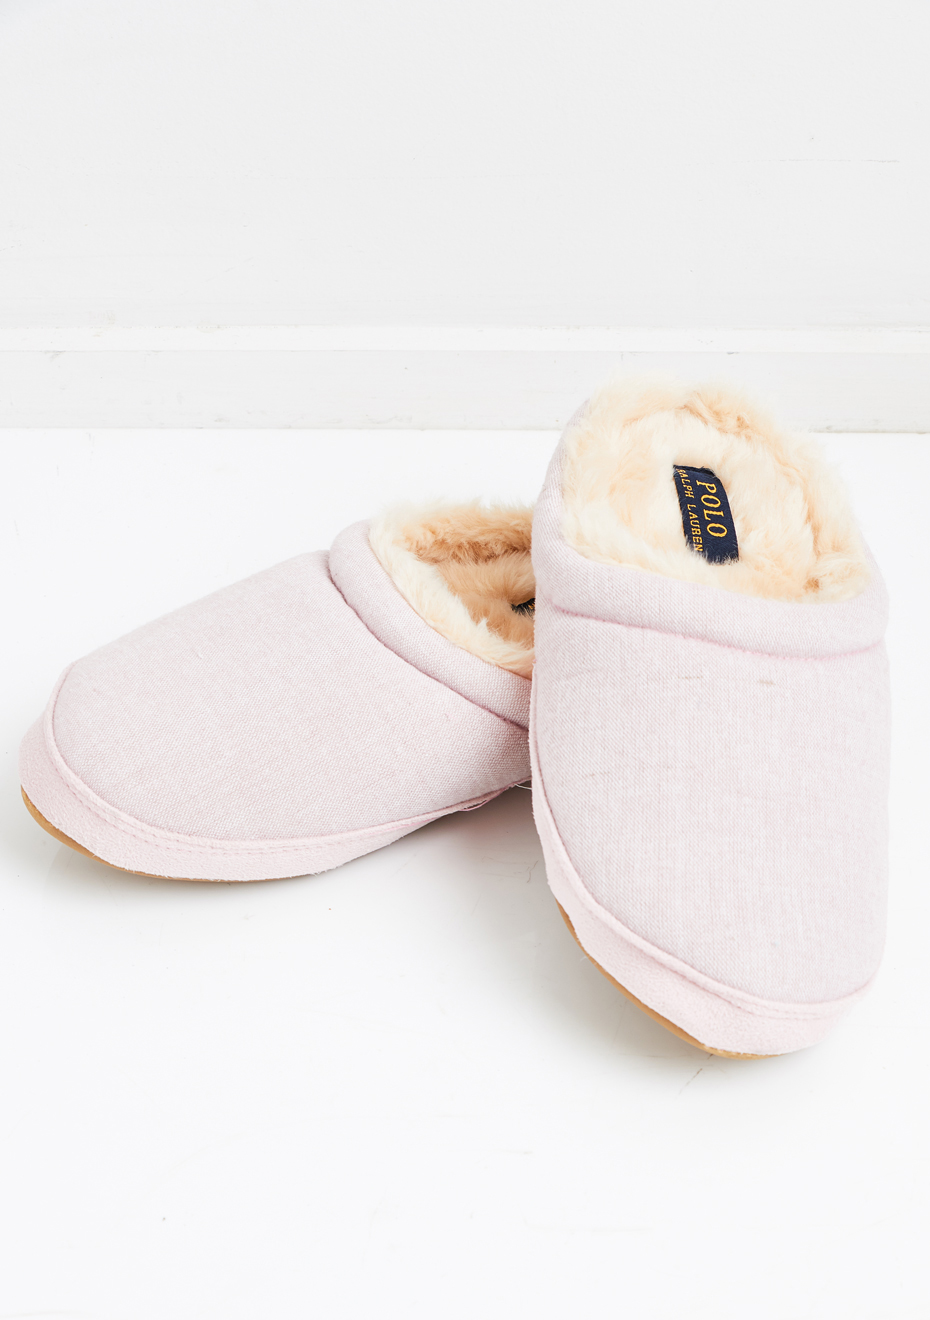 polo slippers womens